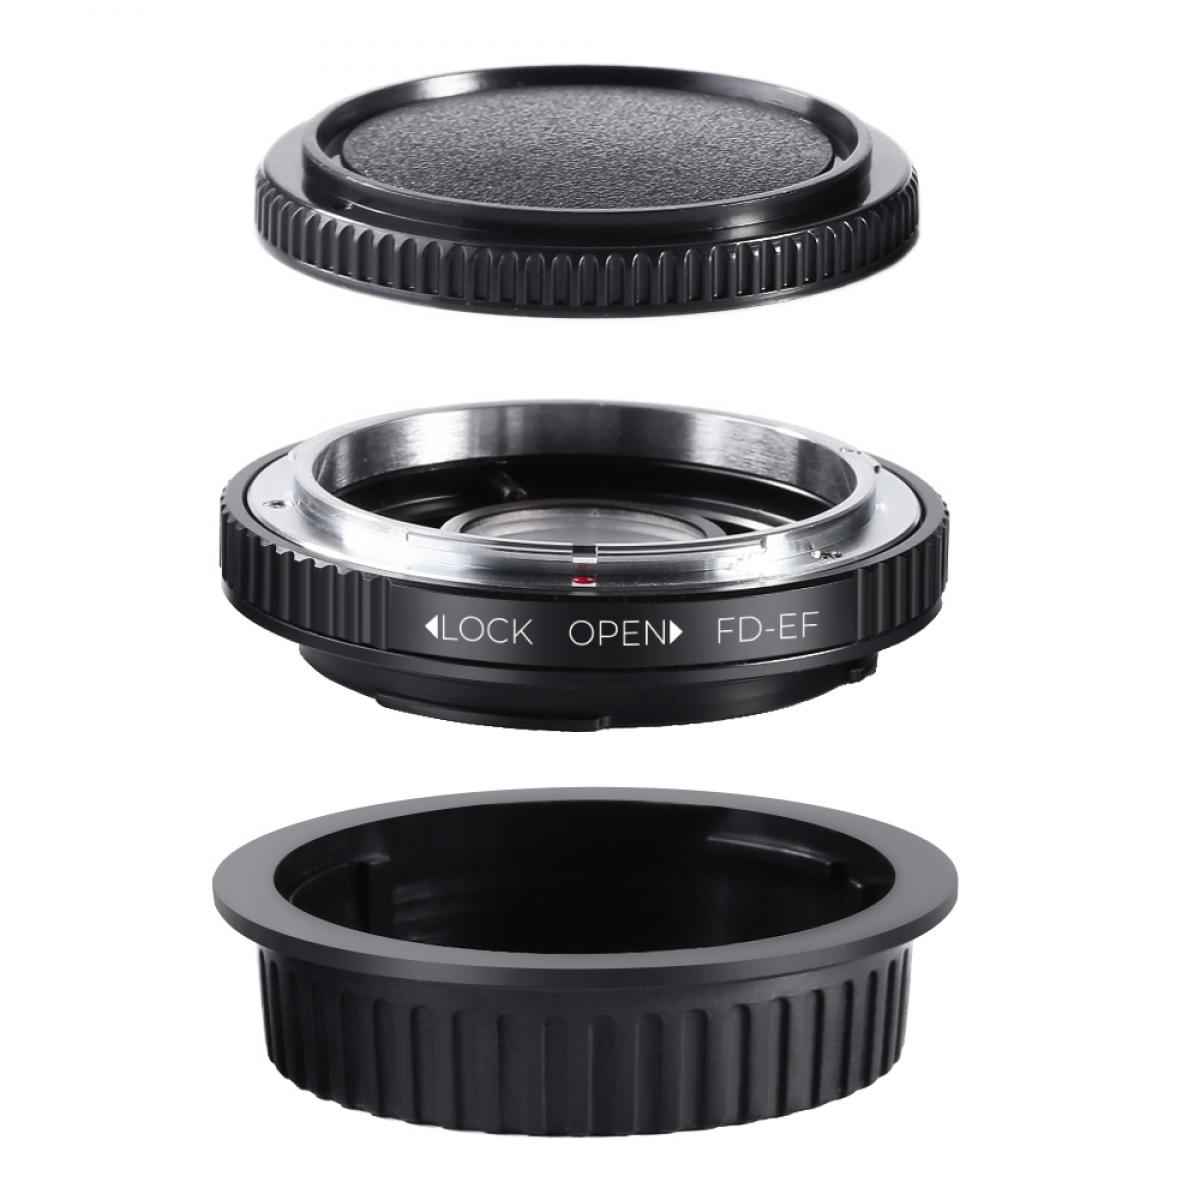 Kandf Concept M13131 Canon Fd Lenses To Canon Eos Ef Lens Mount Adapter With Optic Glass Kandf Concept